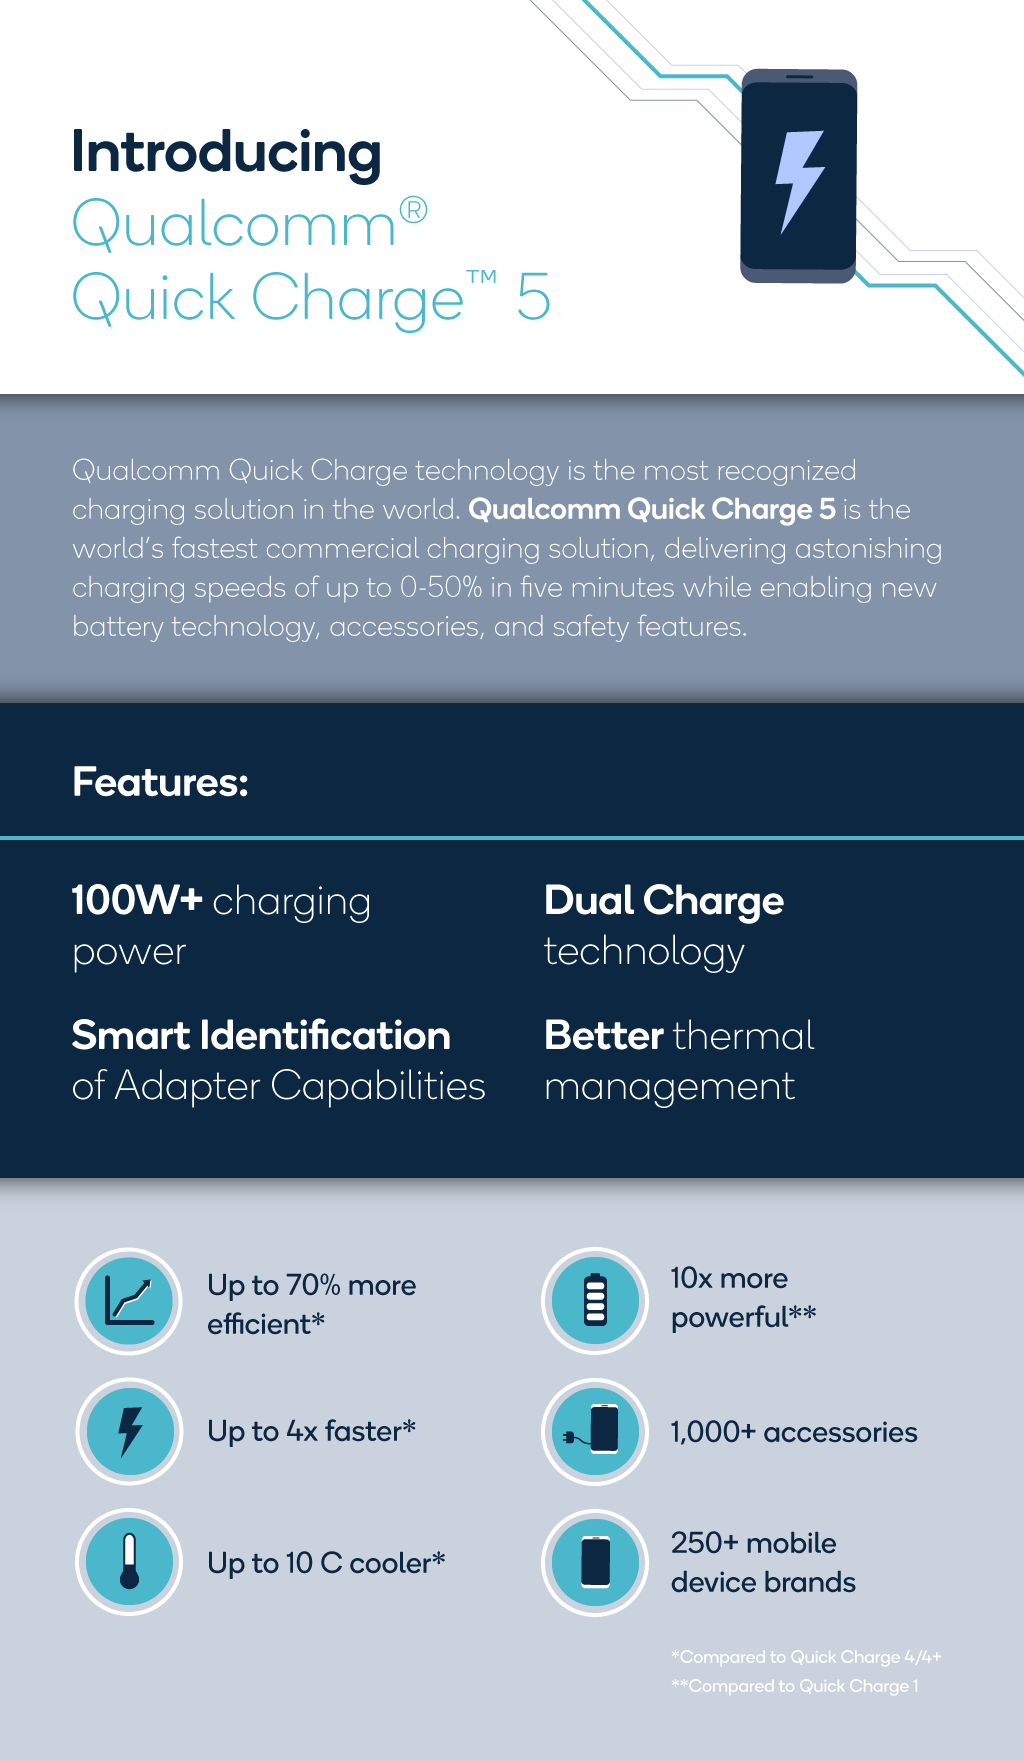 Quick Charge 5 summary